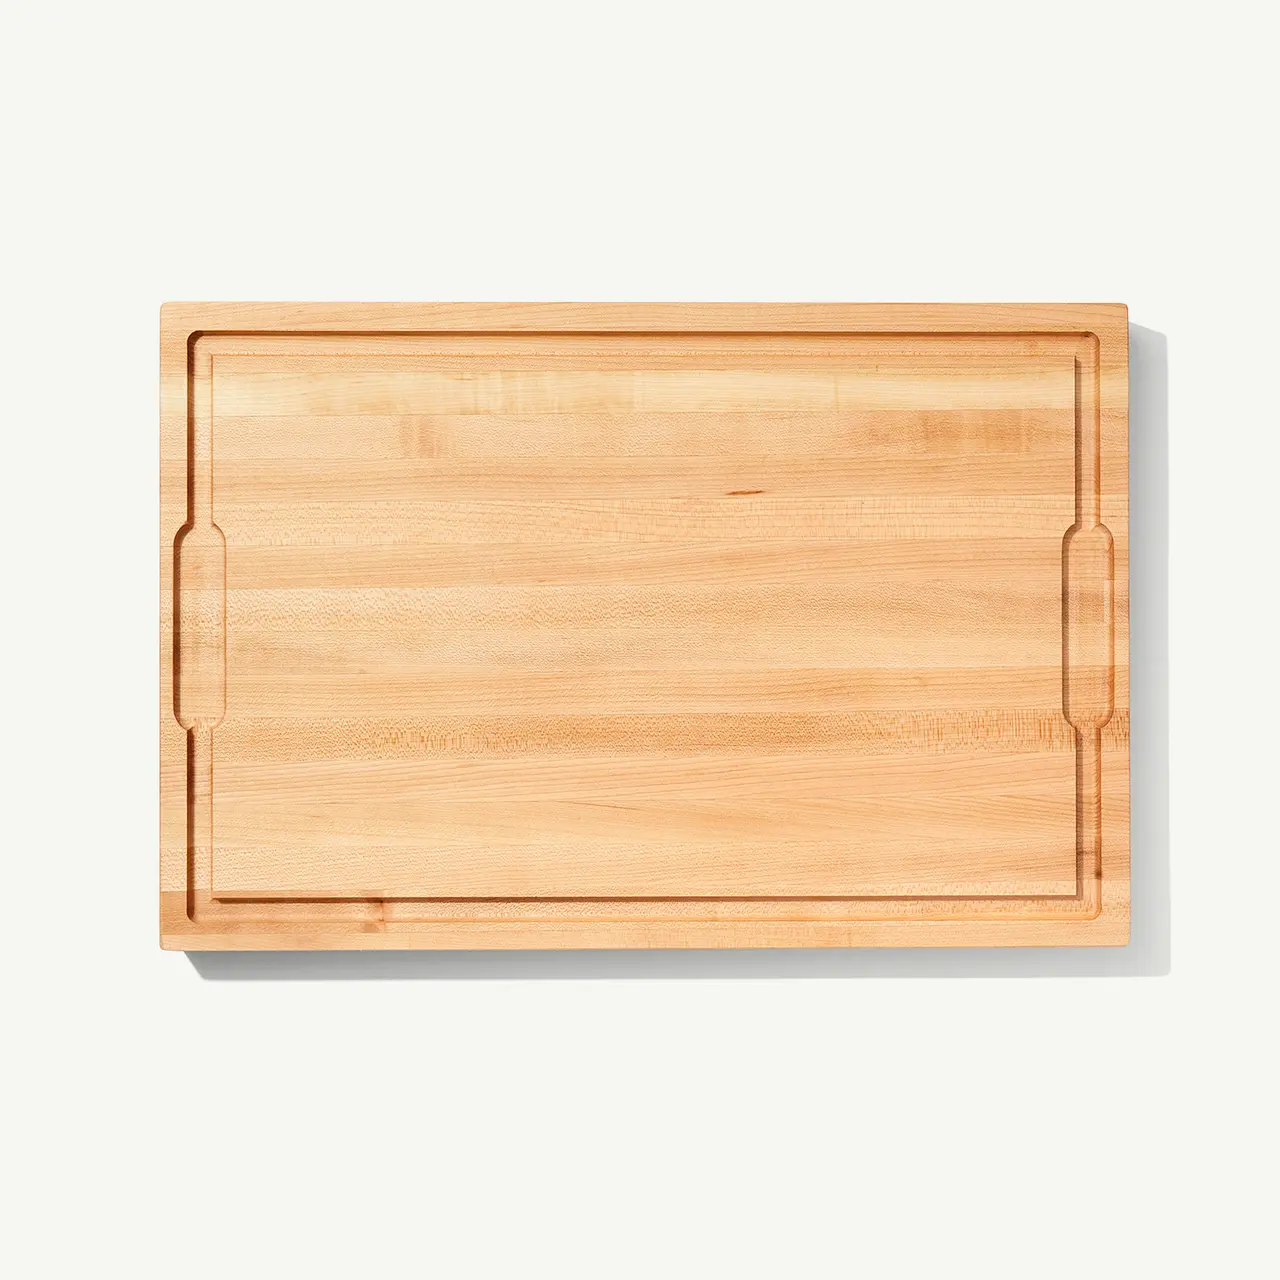 A simple, rectangular wooden cutting board with a visible grain and indented handles on the sides, presented on a plain white background.